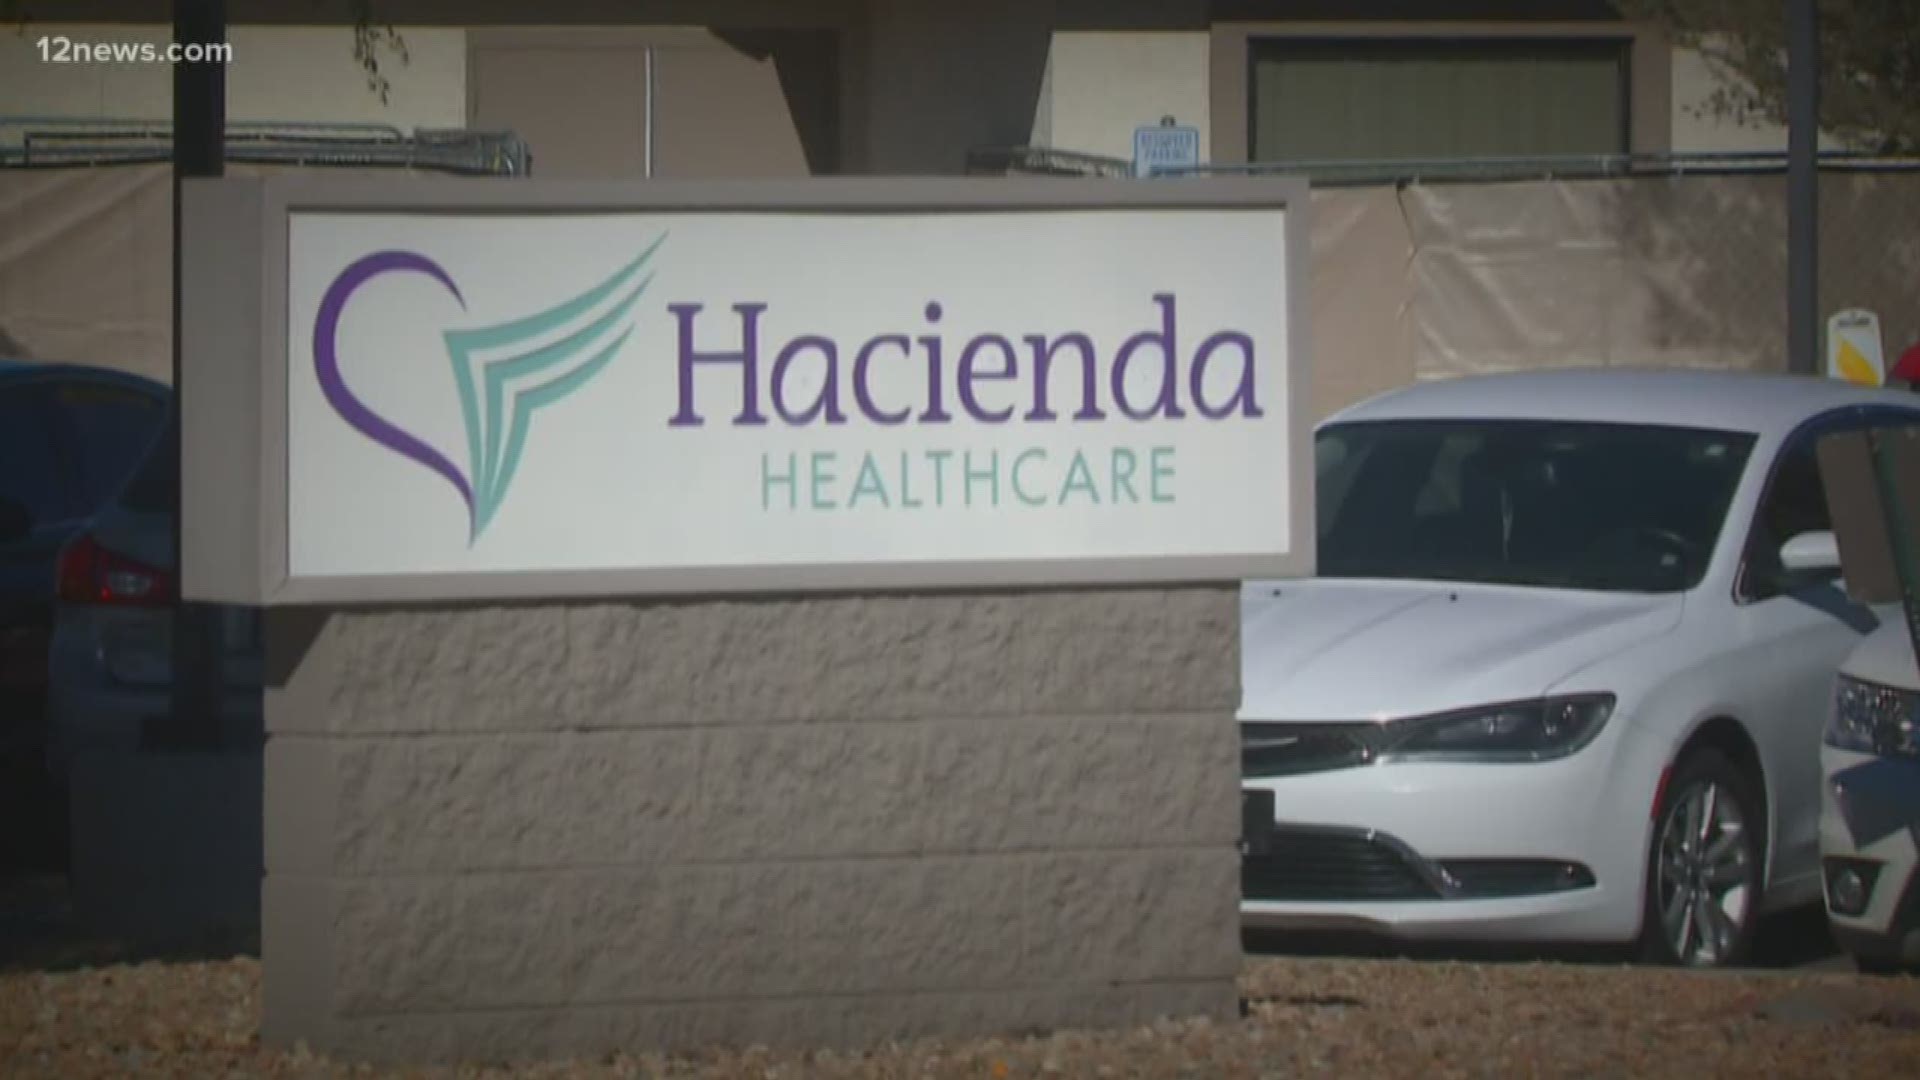 An incapacitated woman nobody thought was pregnant gave birth at the beginning of the year, starting a rape investigation that exposed several problems at Hacienda.